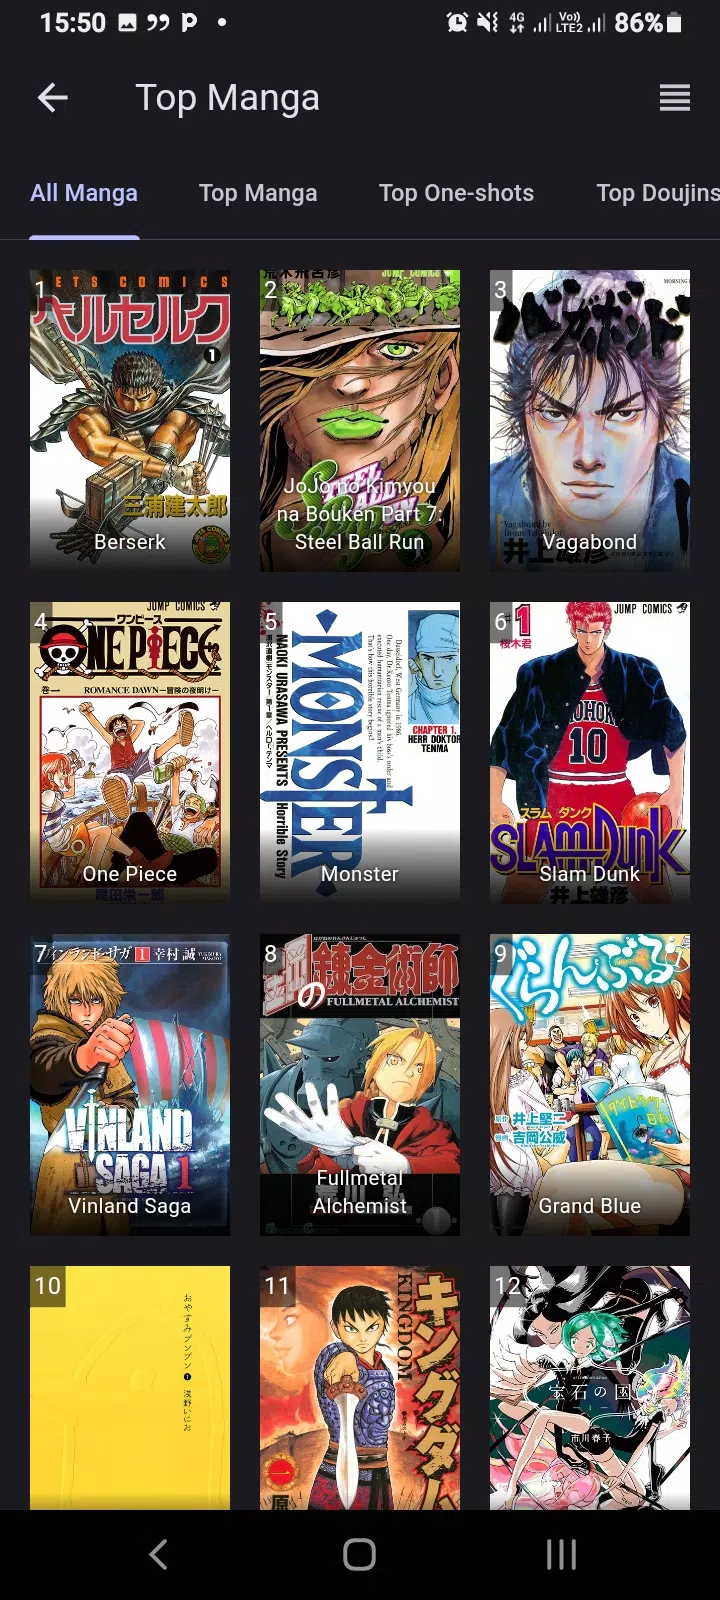 Animeflix - Watch Anime Online HD v31 [Pro] APK -  - Android  & iOS MODs, Mobile Games & Apps